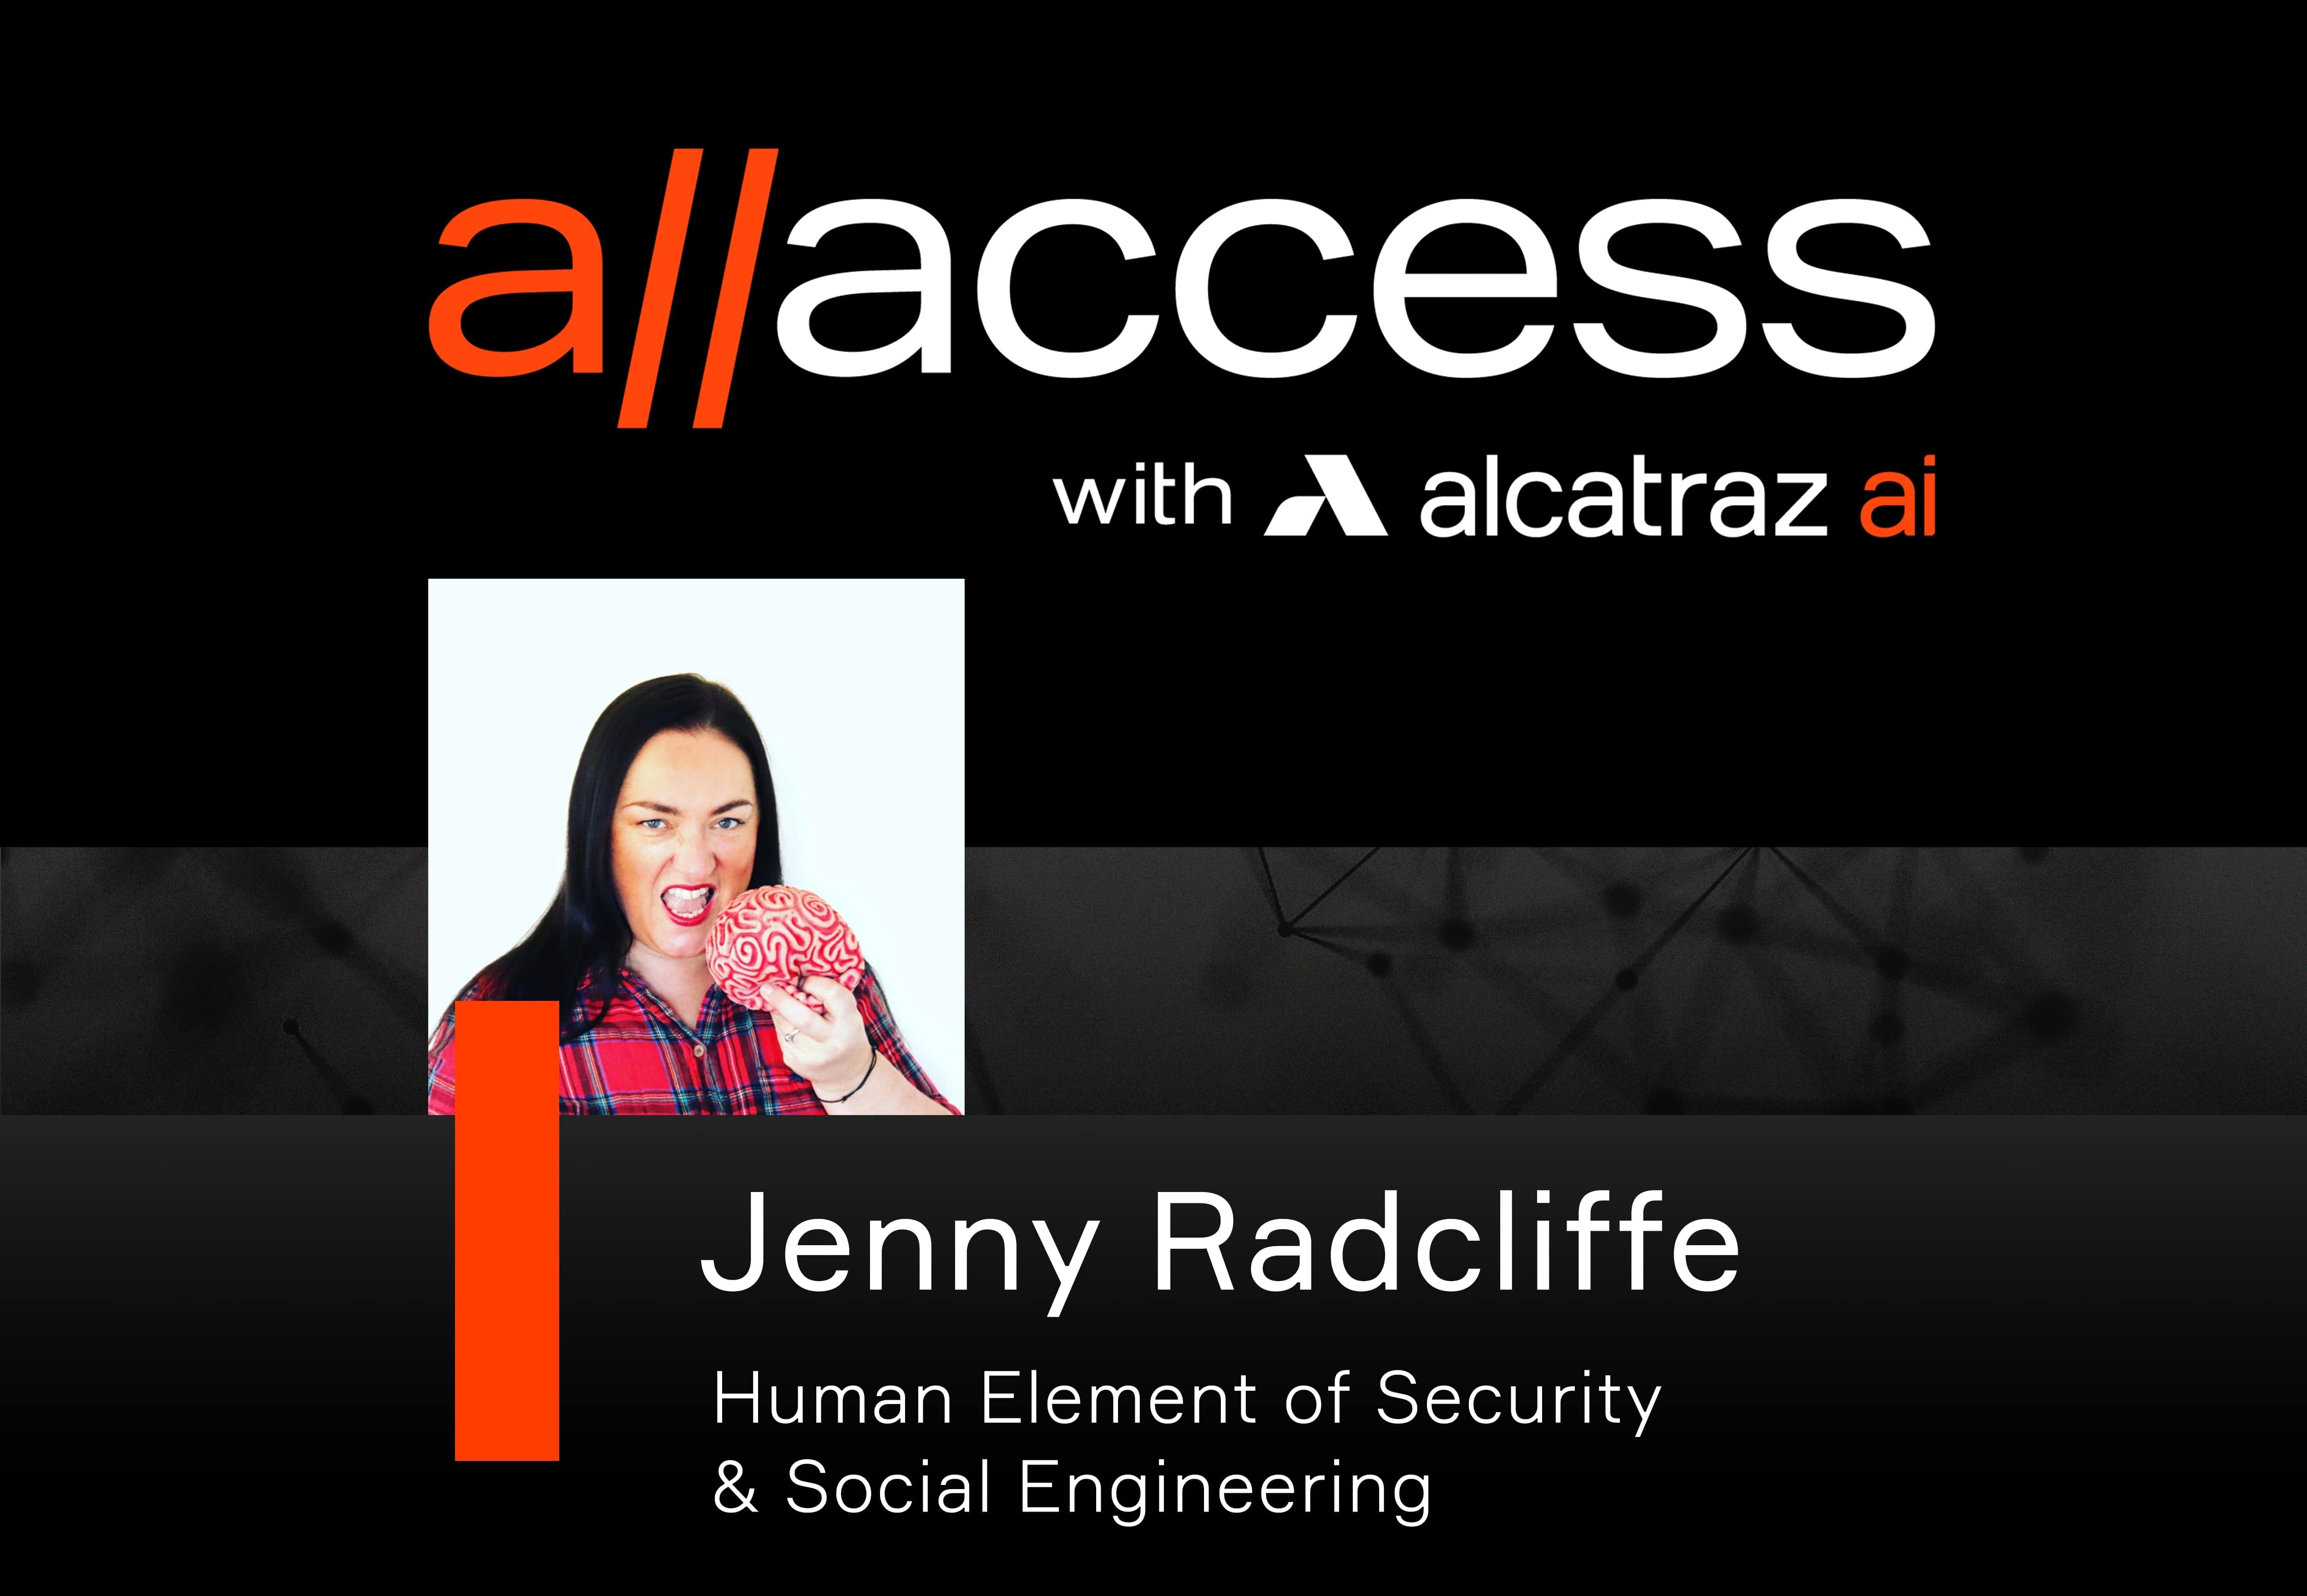 All Access interview with Jenny Radcliffe on the Alcatraz AI blog